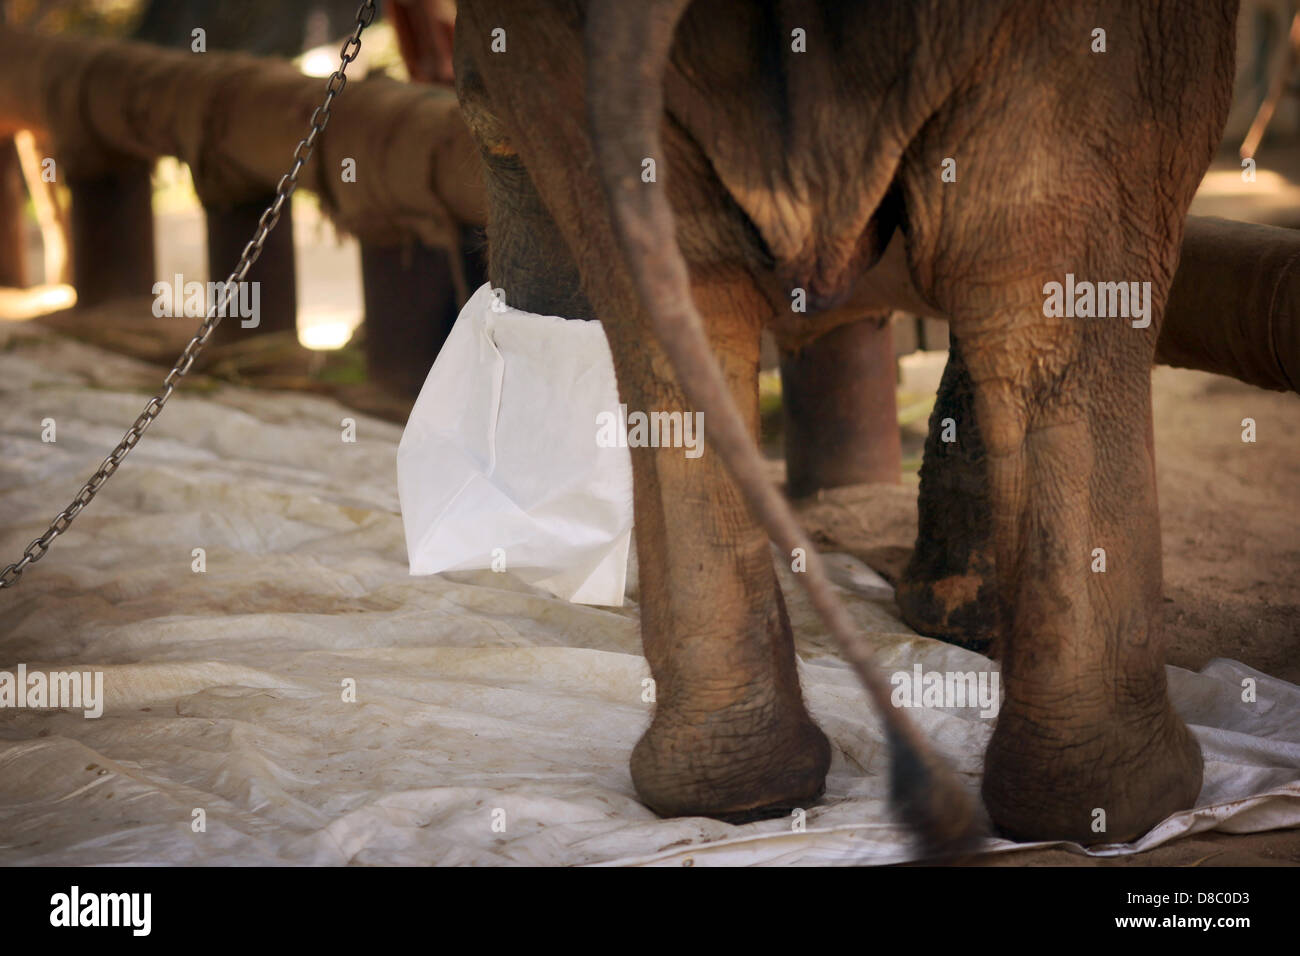 An elephant injured by a landmine, pictured at the 'Friends of the Asian Elephant Hospital' on 27.12.2012 in Lampang in Thailand. Photo: Fredrik von Erichsen Stock Photo